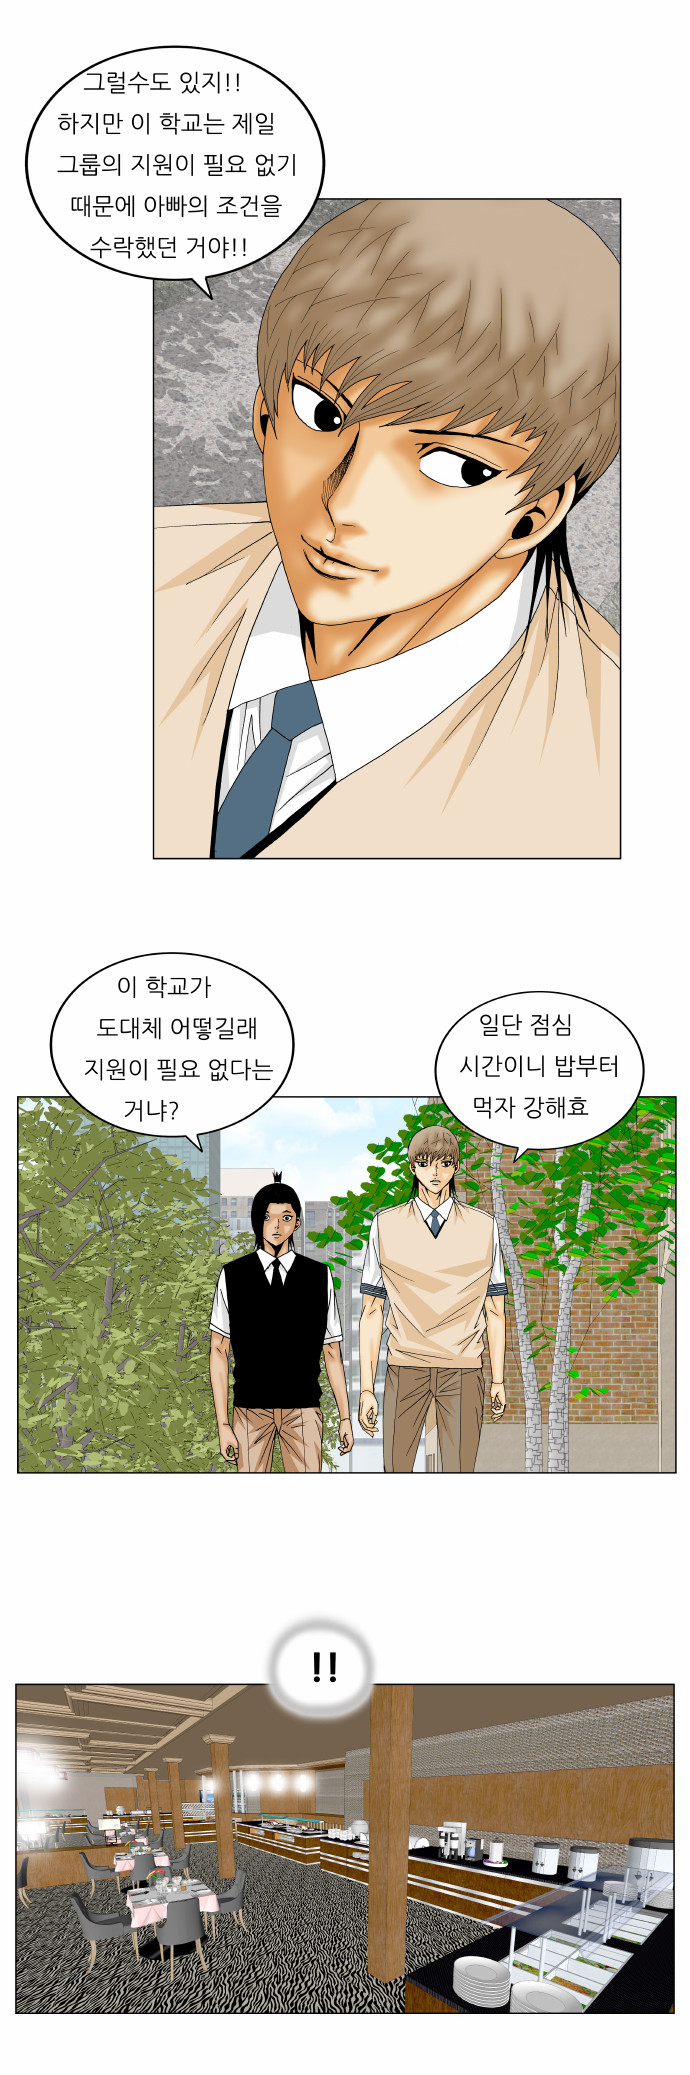 Ultimate Legend - Kang Hae Hyo - Chapter 163 - Page 4